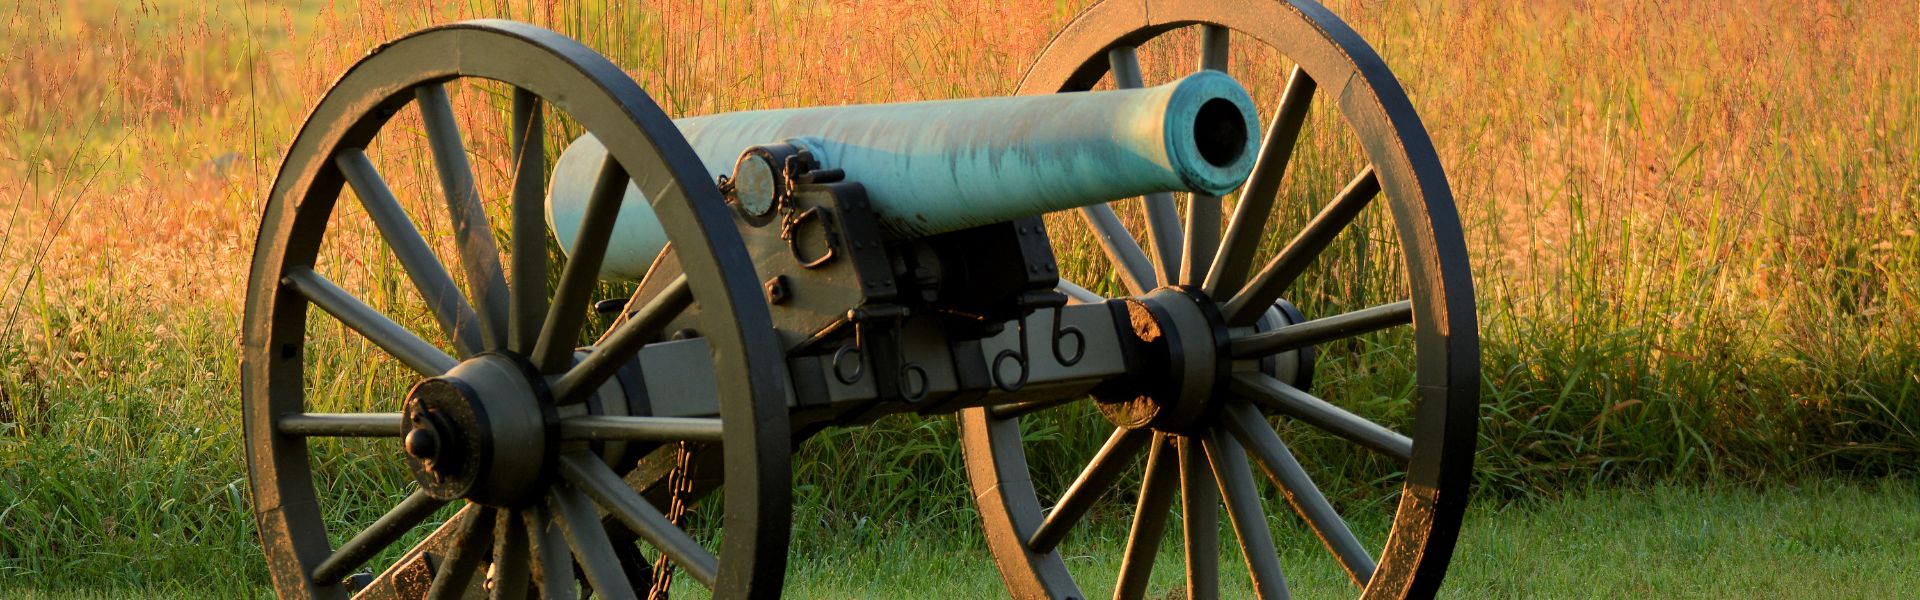 Cannon for Gettysburg event header image